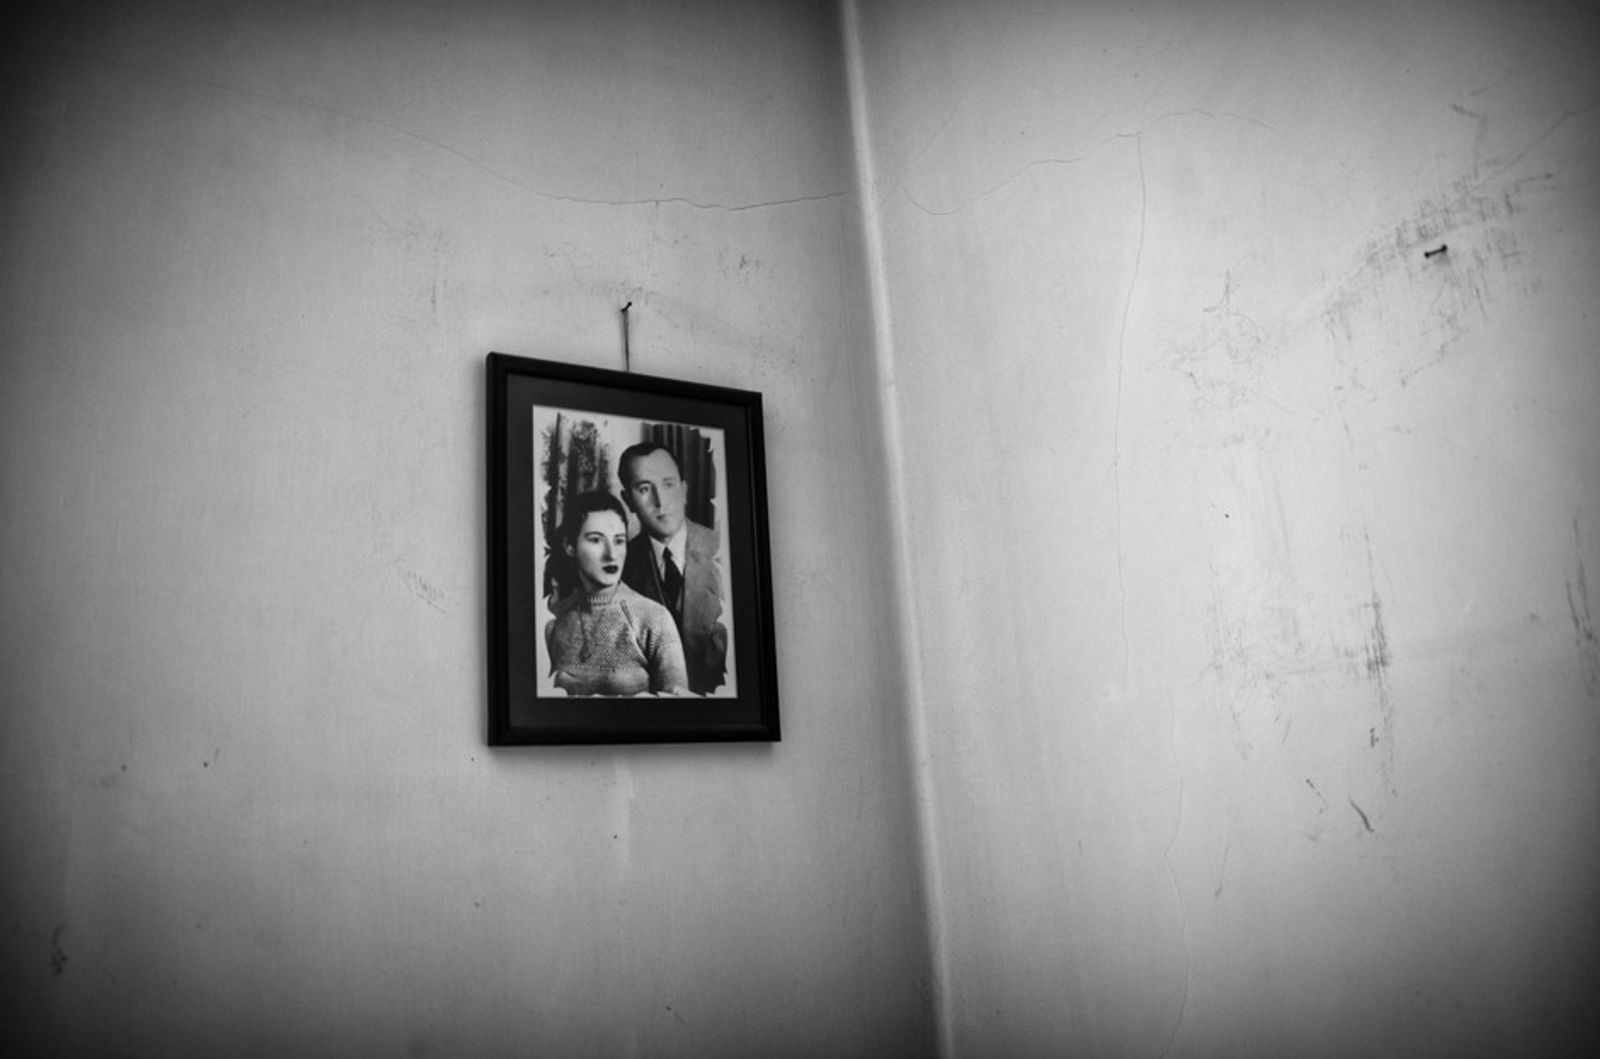 © Khashayar Sharifaee - A picture from my grandfather and grandmother from around 60 years ago in their bedroom.